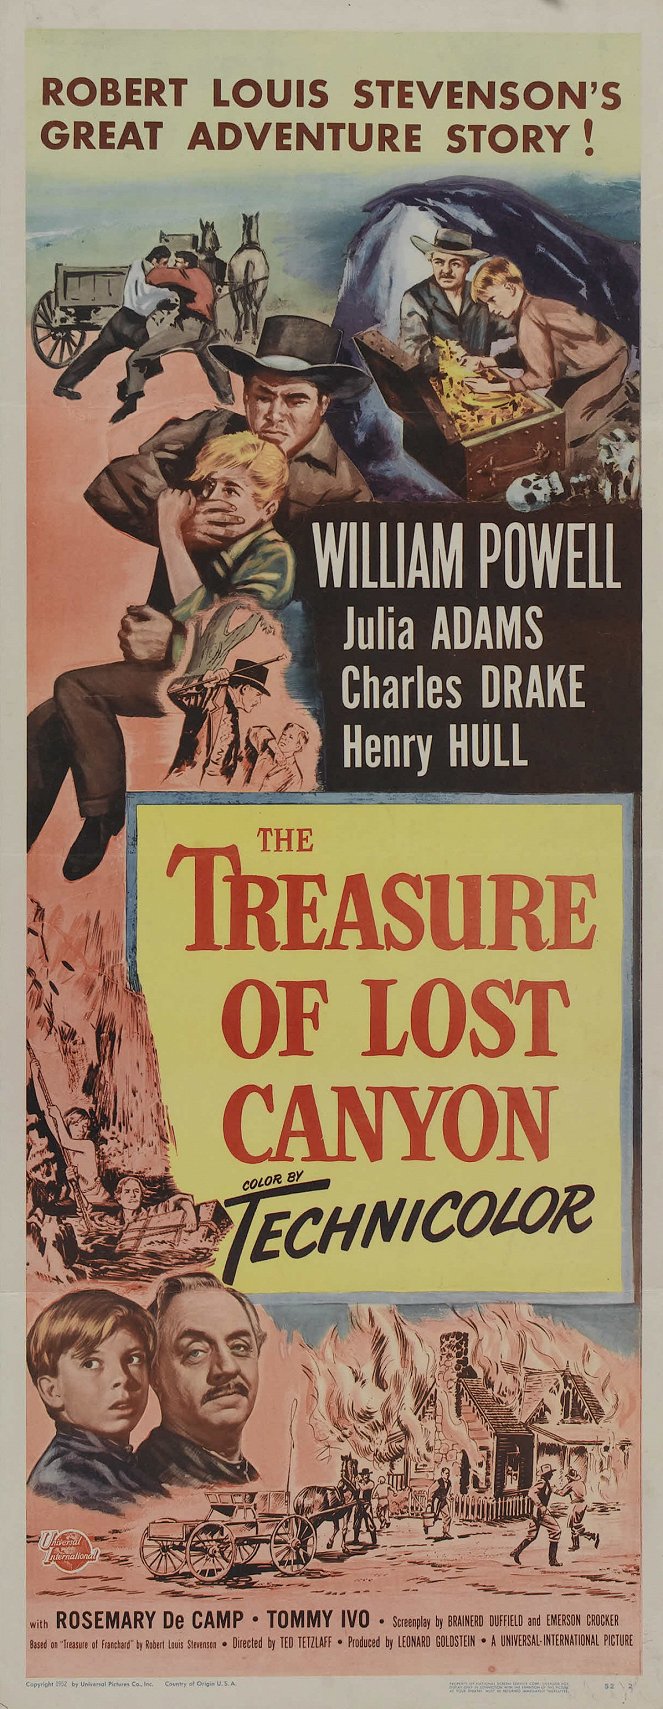 The Treasure of Lost Canyon - Cartazes